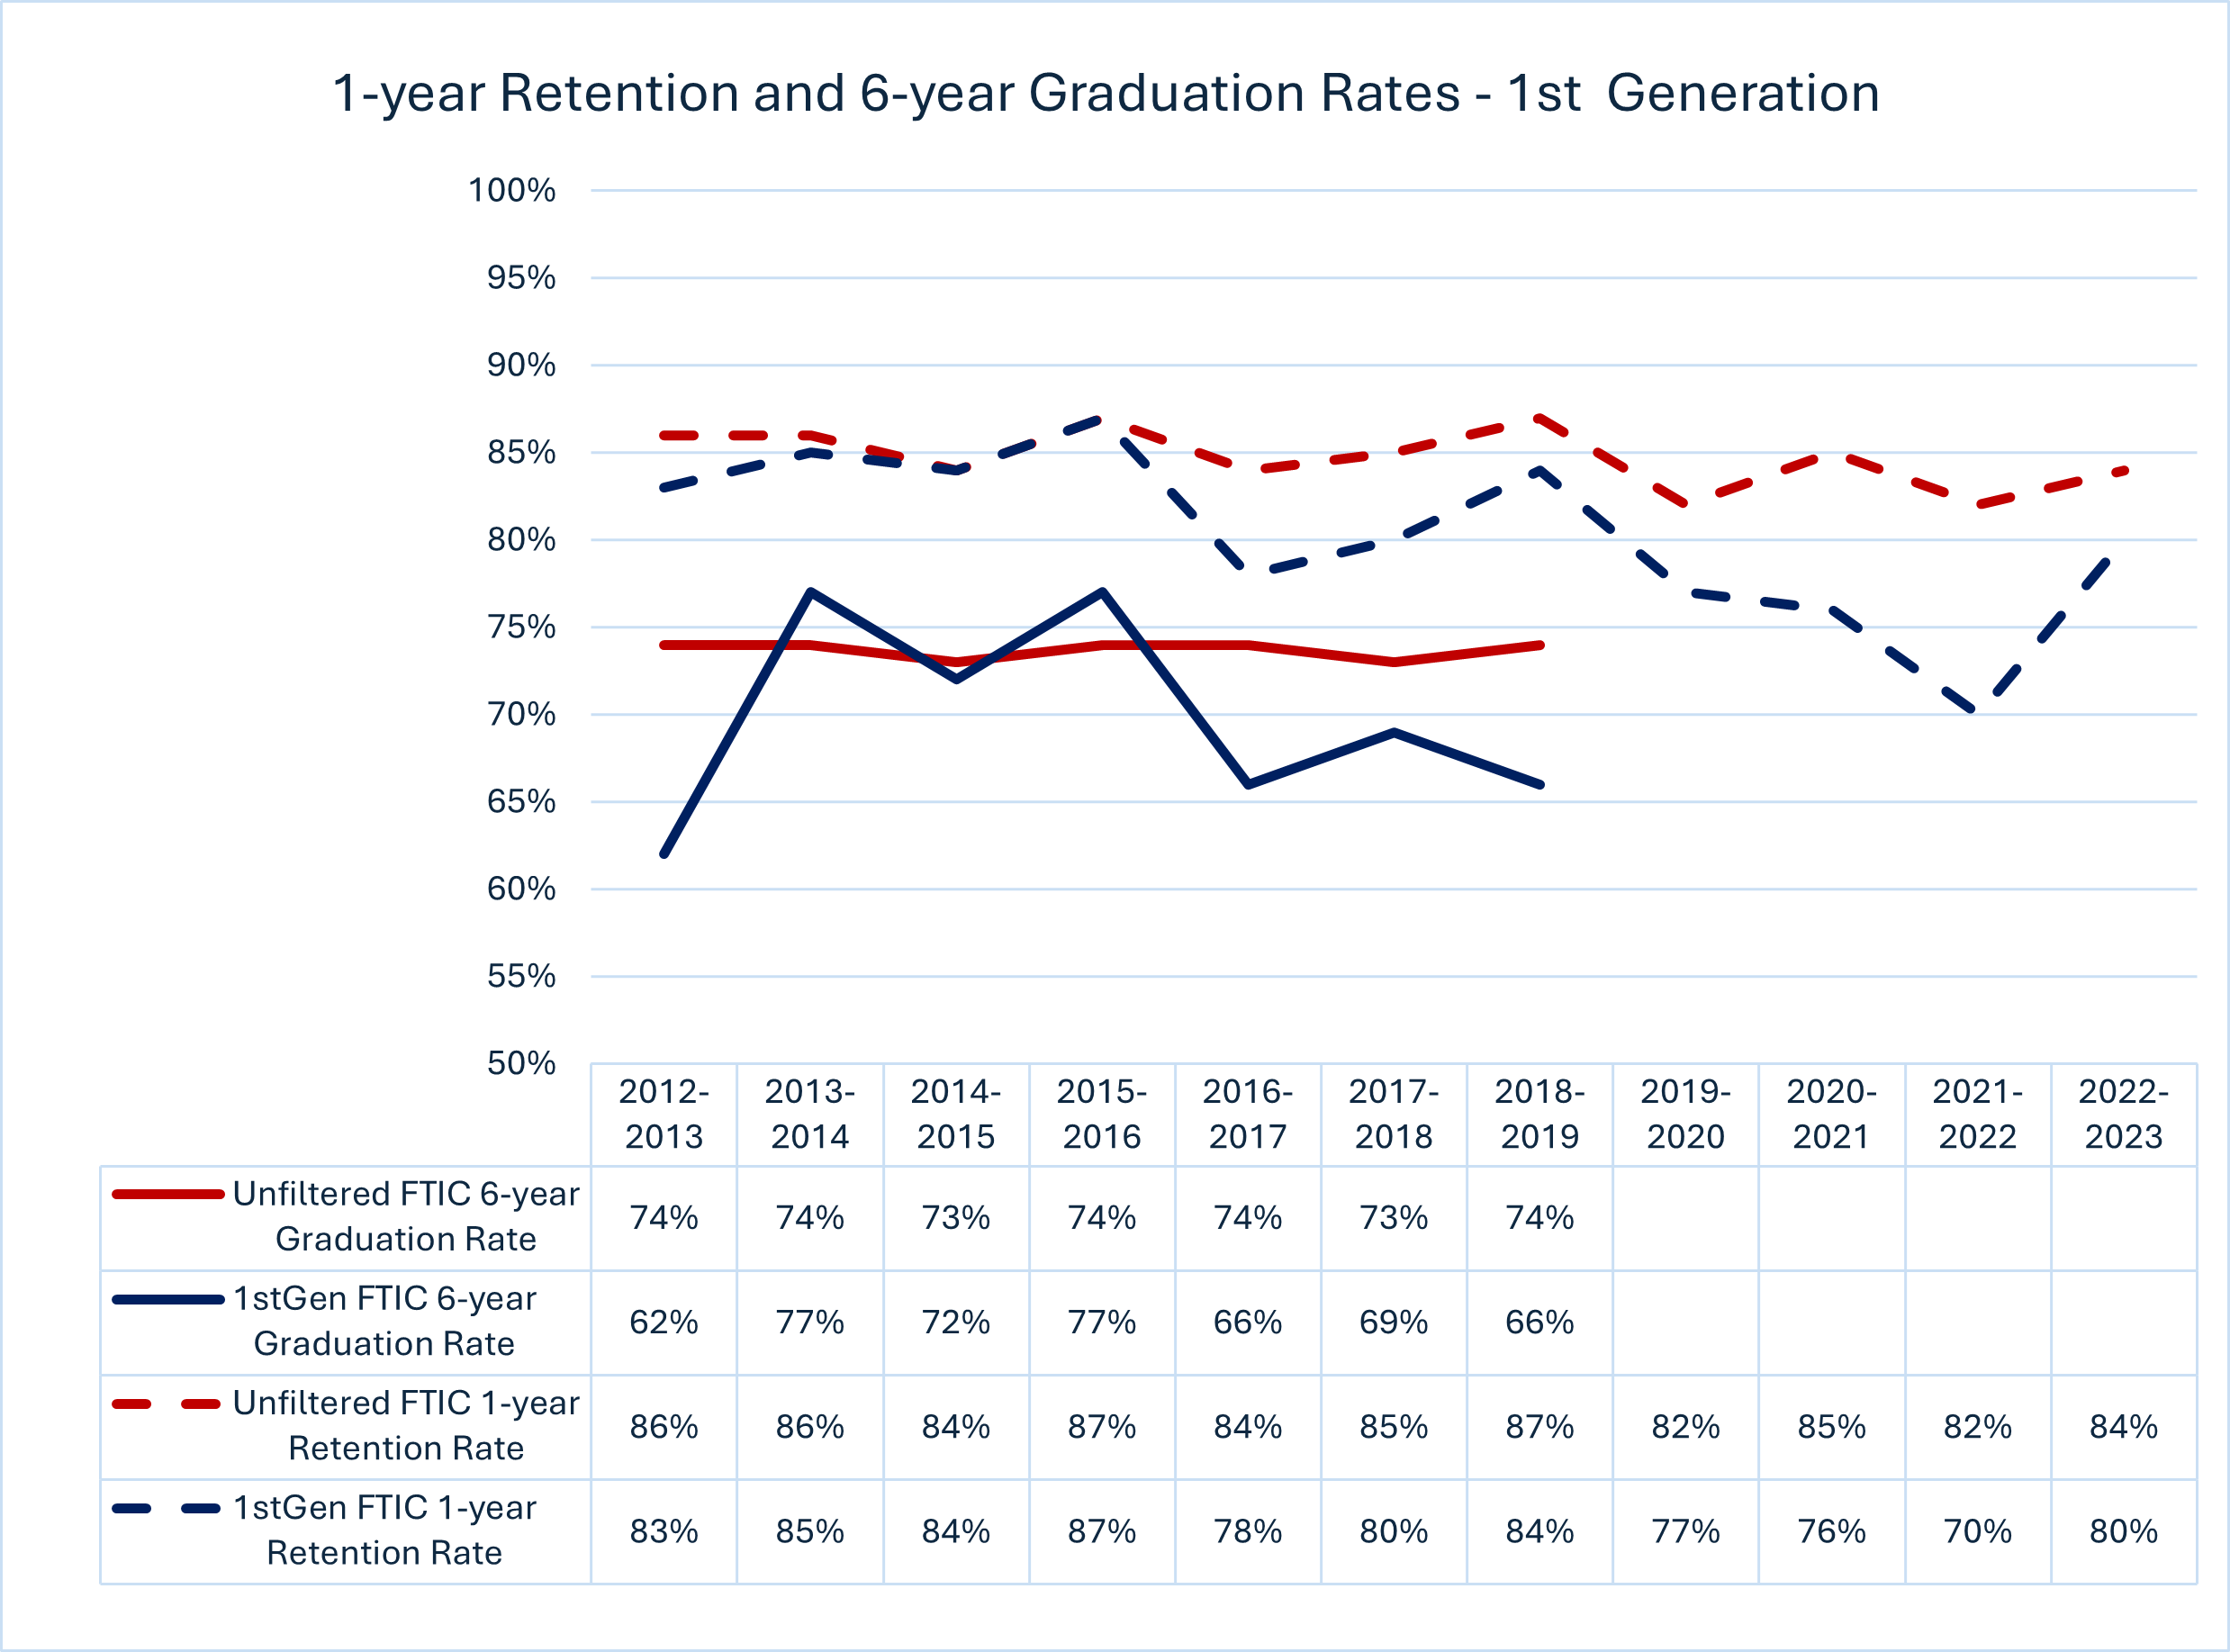 1 year Retention and 6 year Graduation Rates First Generation